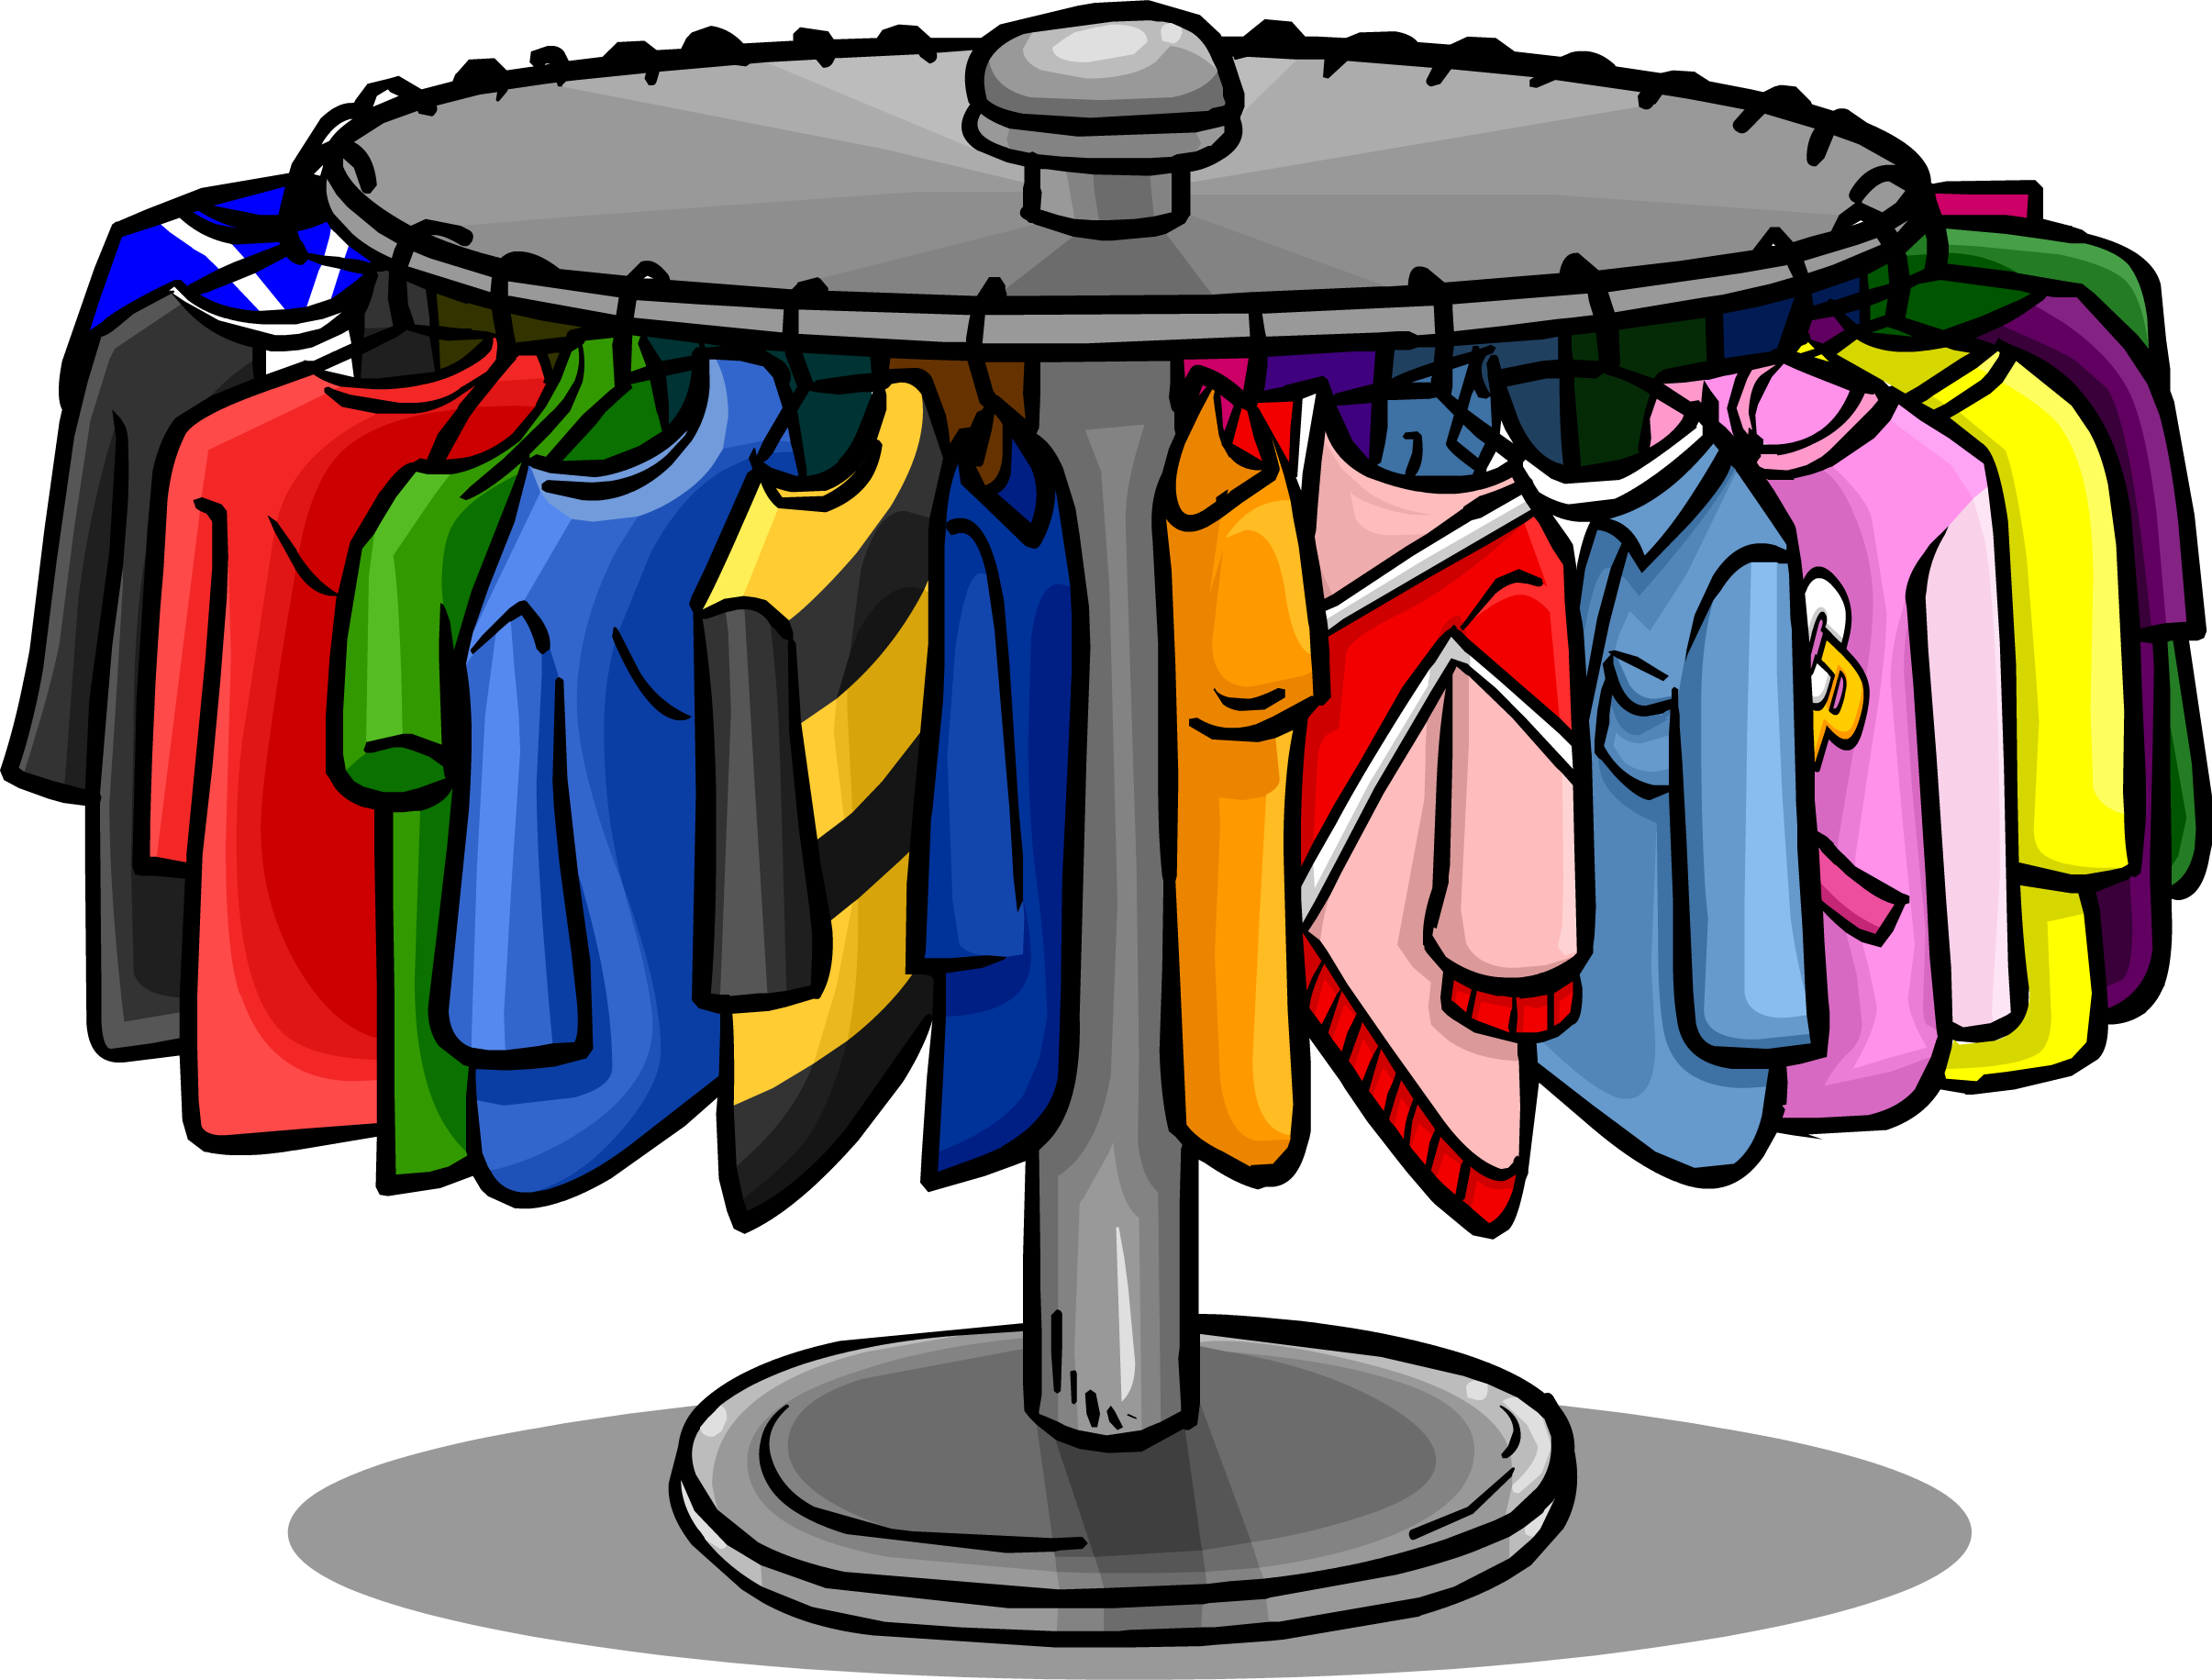 Clothing Sale Kid Image Png Clipart